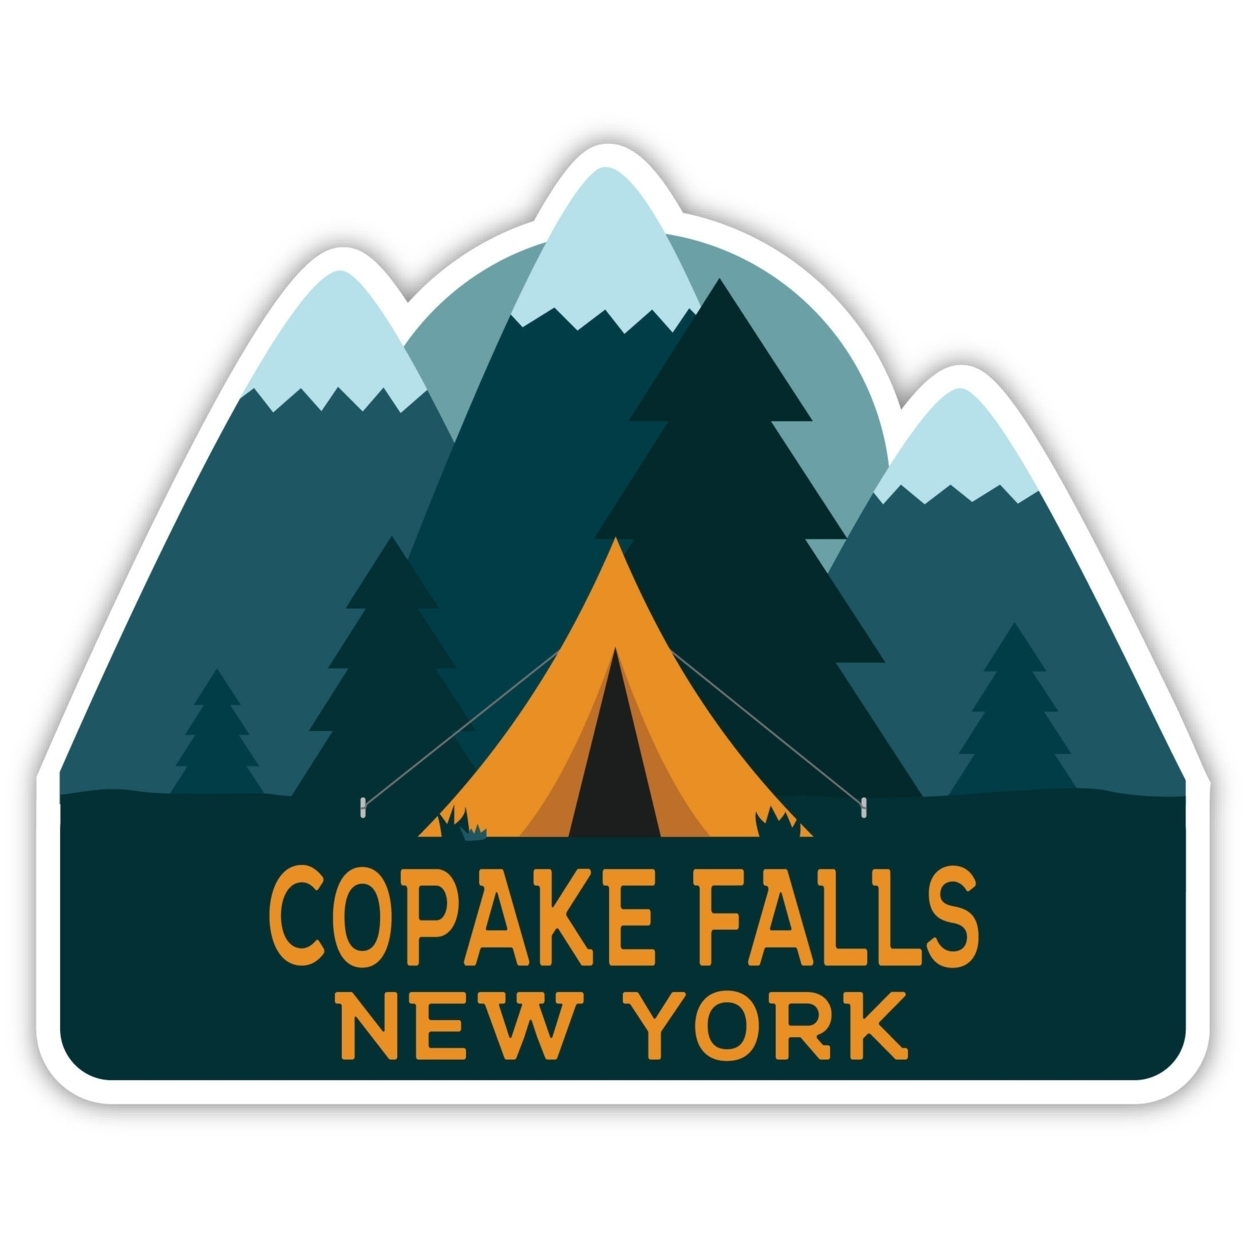 Copake Falls New York Souvenir Decorative Stickers (Choose Theme And Size) - 4-Pack, 10-Inch, Tent